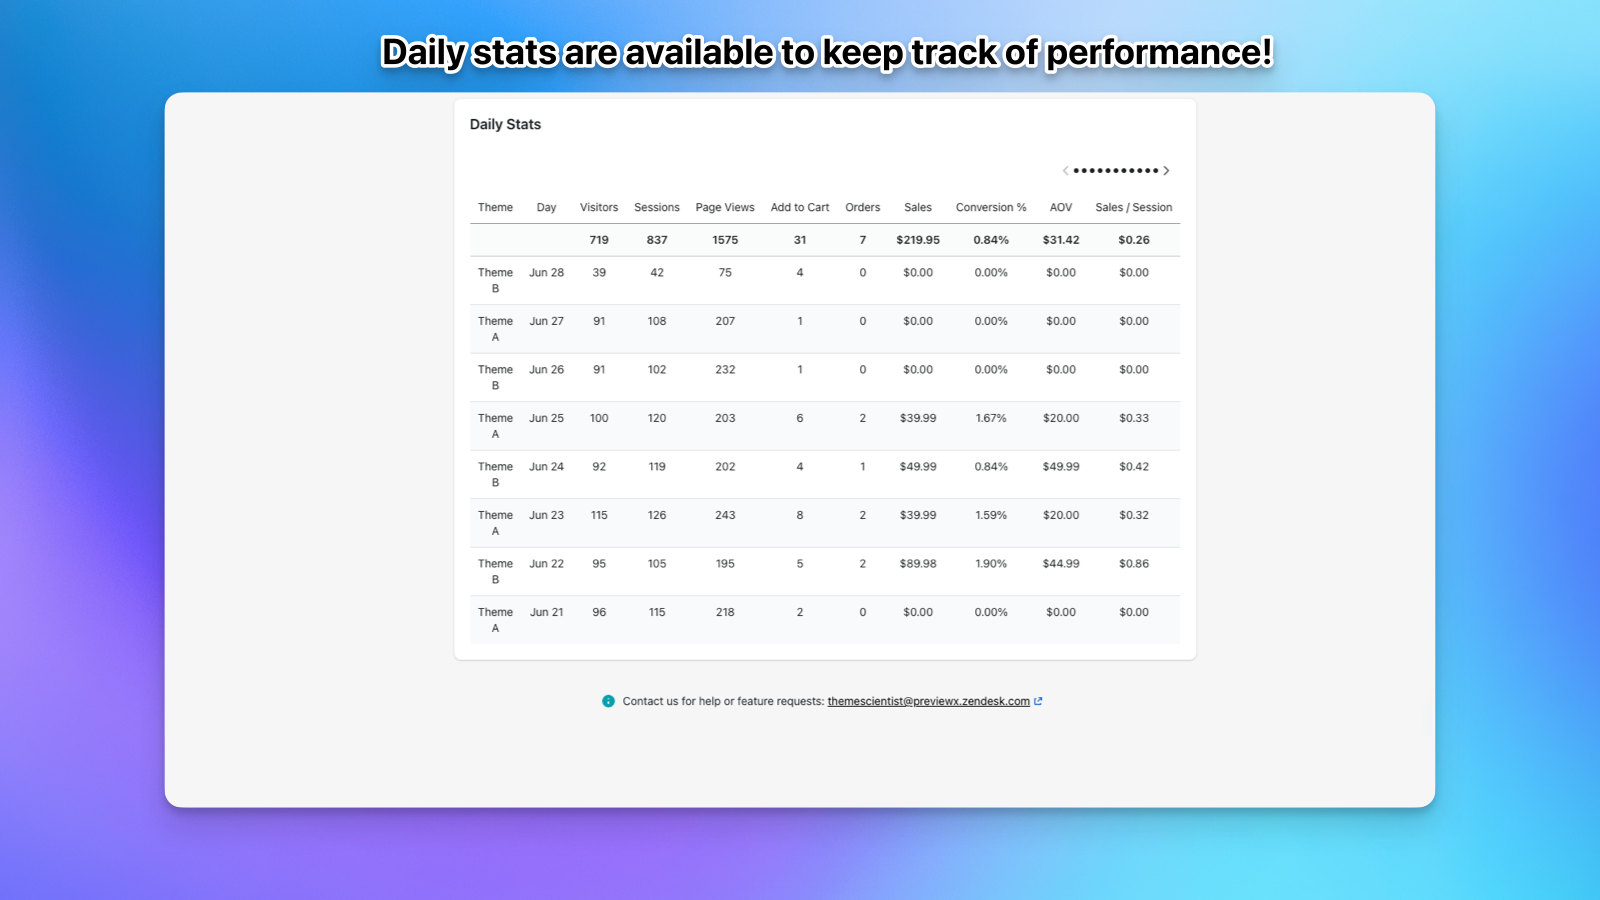 Daily stats provide all the data for your ab testing